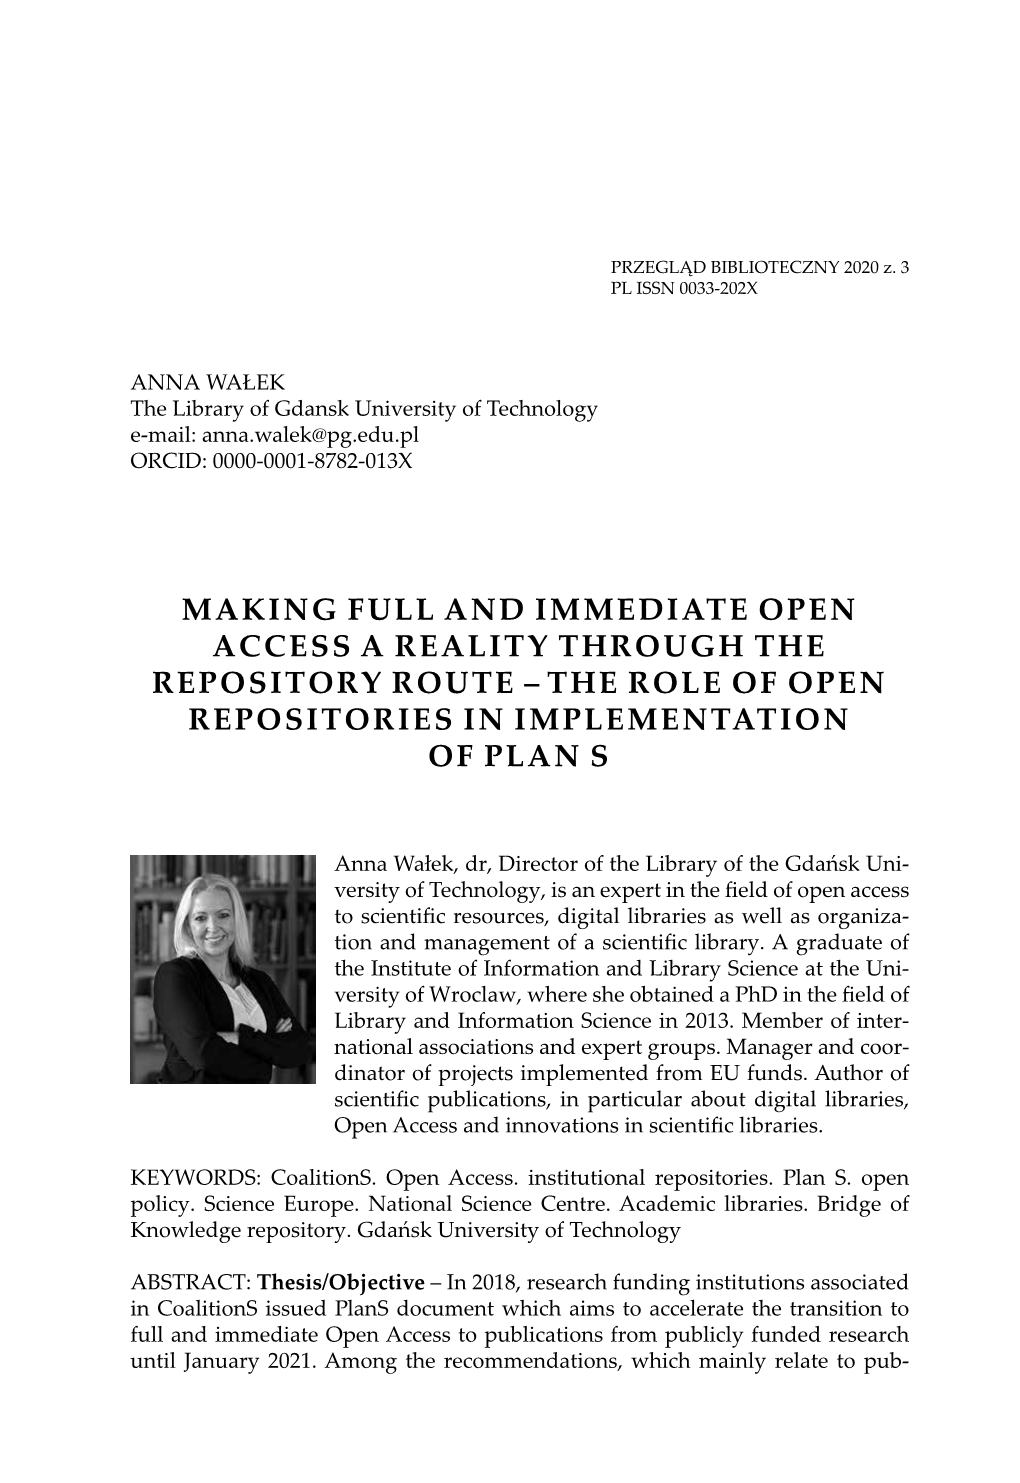 The Role of Open Repositories in Implementation of Plan S